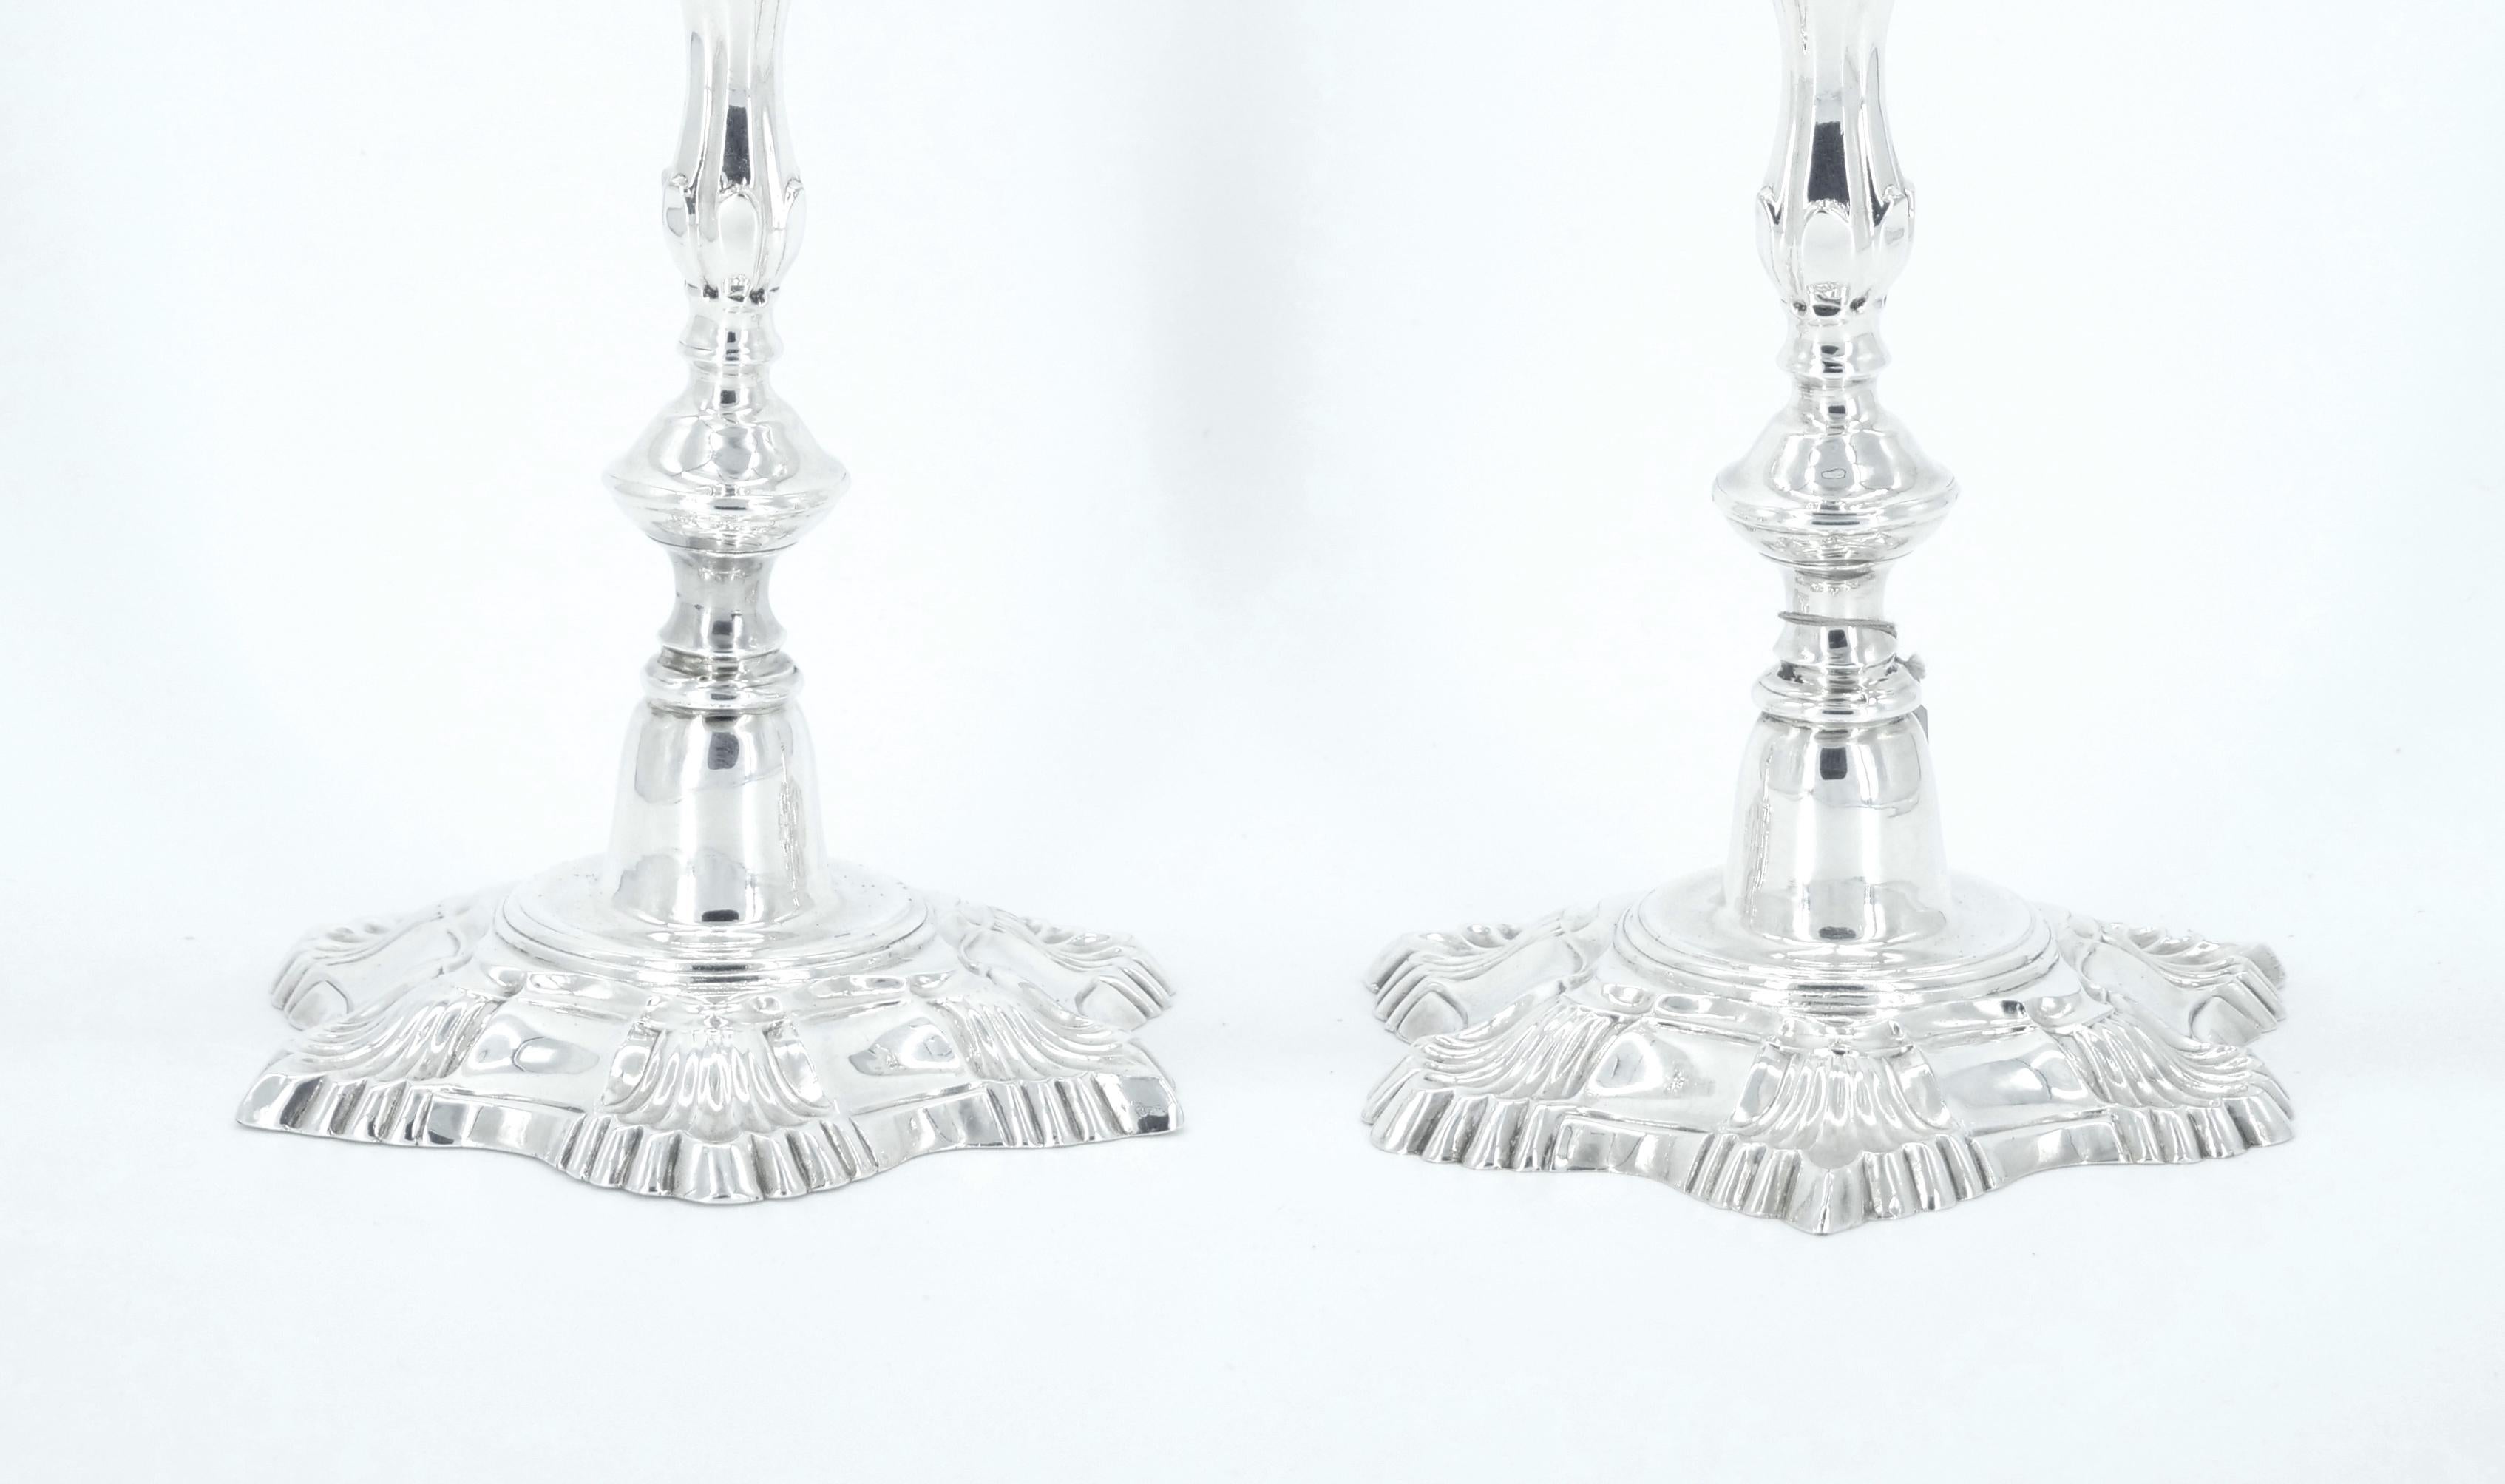 Elevate your table setting with this exquisite pair of antique silver-plated candlesticks, crafted in the late 19th century and showcasing the timeless elegance of the English Georgian style. Manufactured by Regent Sheffield, each candlestick is